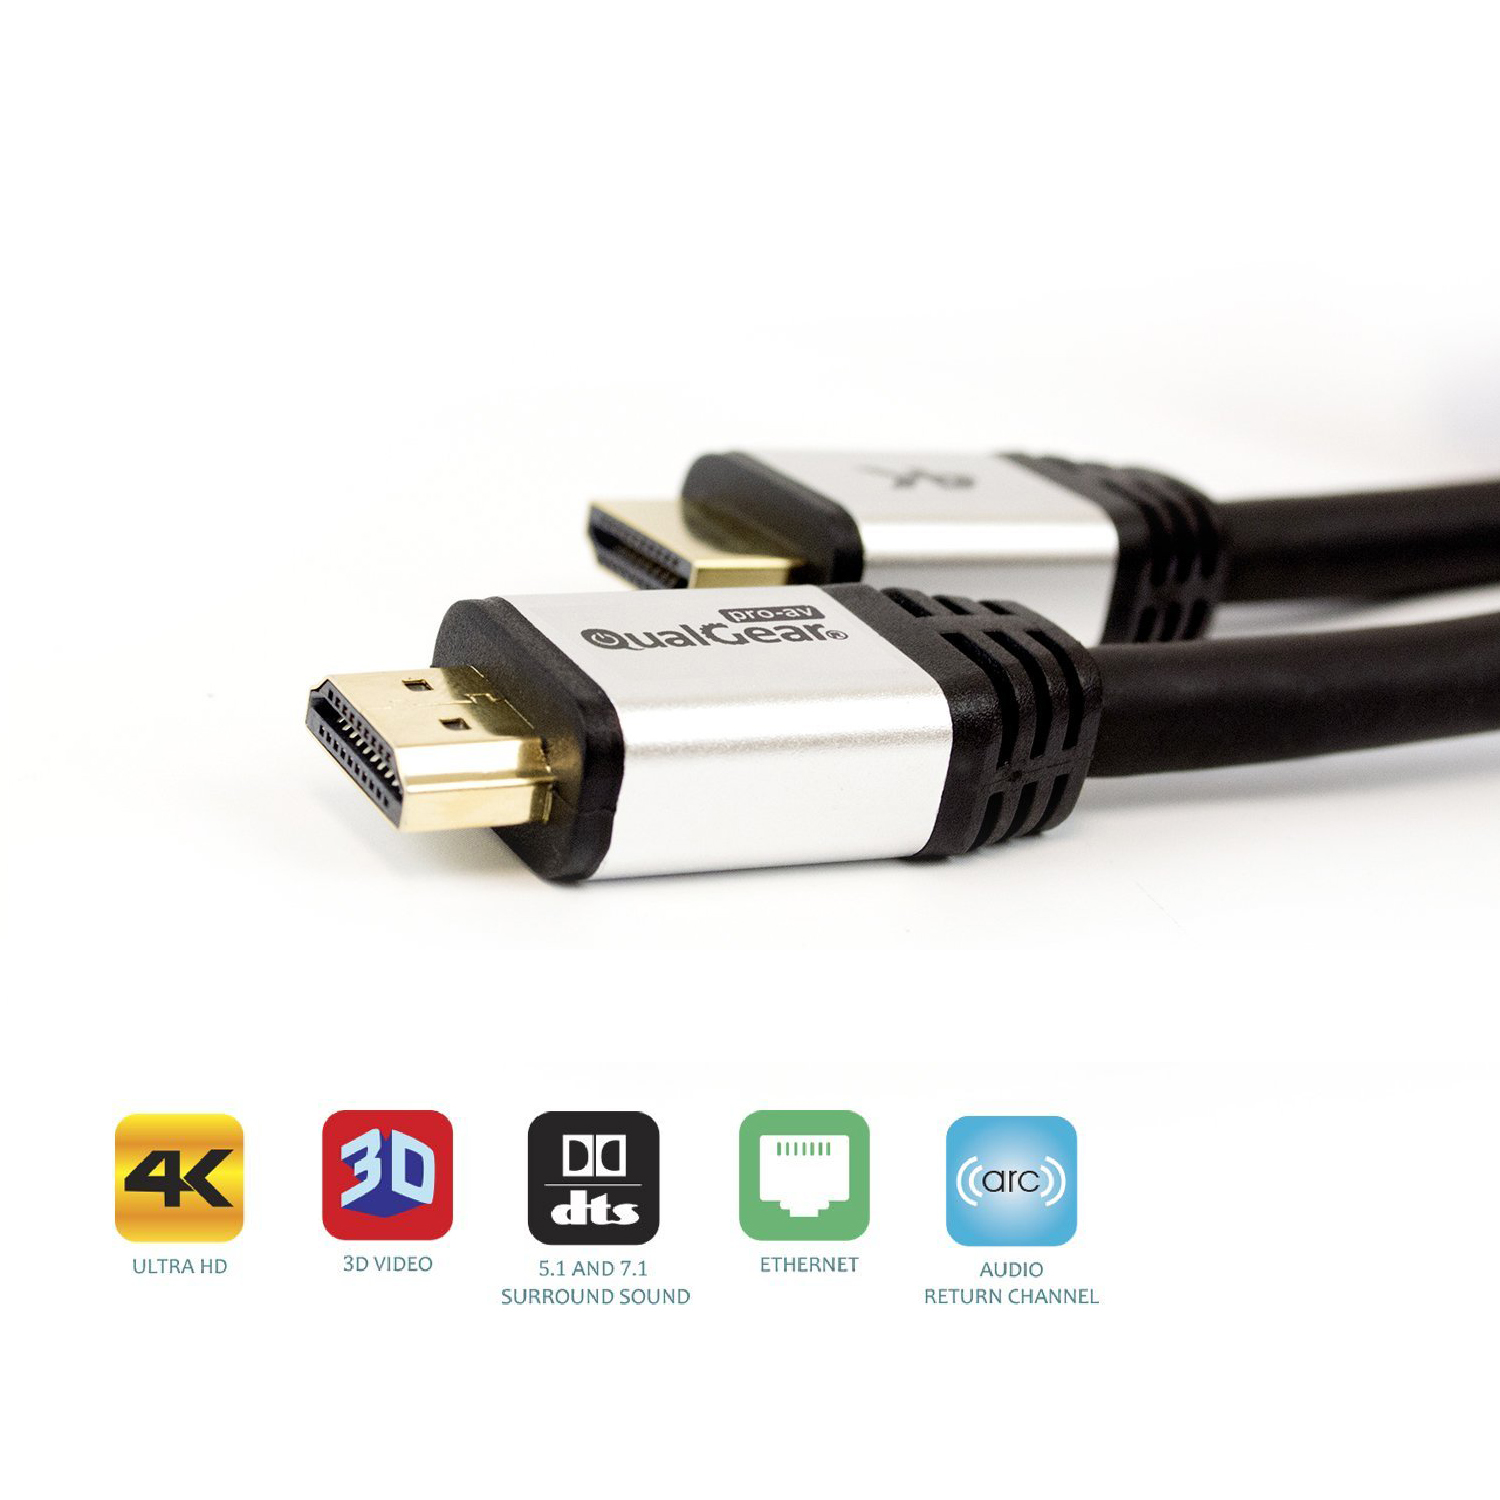 QualGear 60 Ft High-Speed Long HDMI 2.0 Cable with 24K Gold Plated Contacts, Supports 4K Ultra HD, 3D, 18 Gbps, Audio Return Channel,CL3 Rated for In-Wall Use (QG-CBL-HD20-60FT)